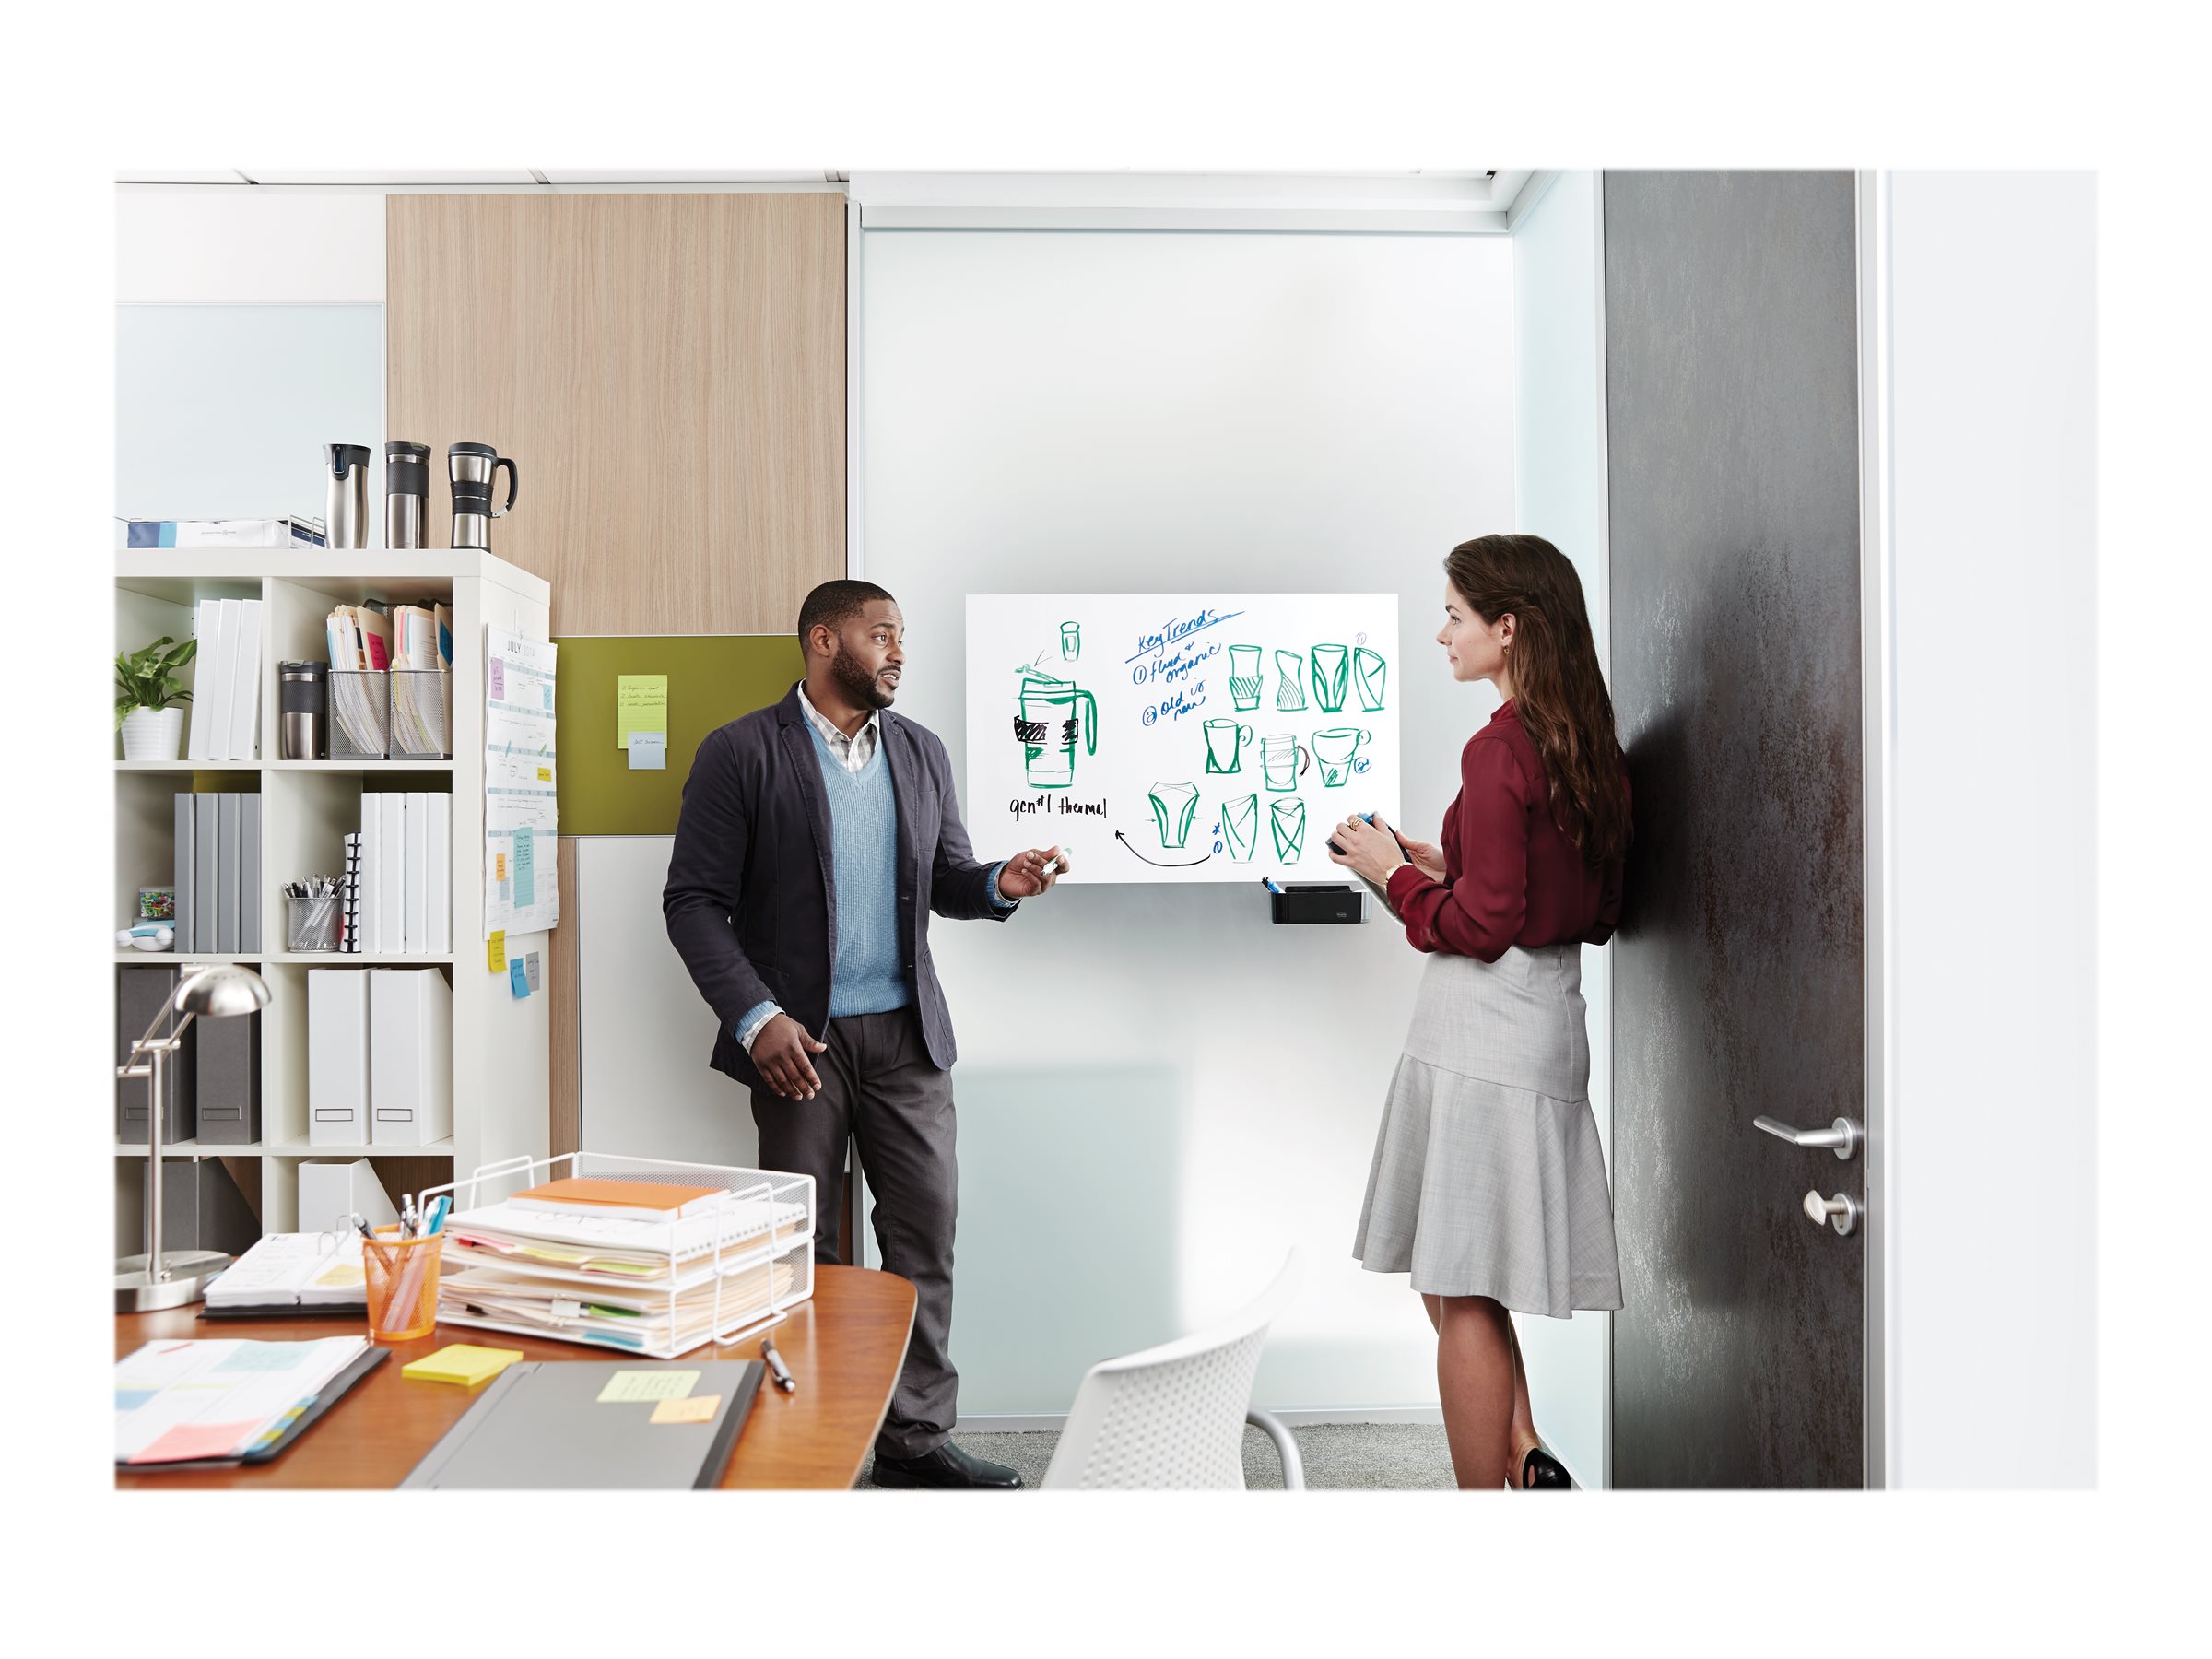 Buy 3M Post-It Dry Erase Whiteboard Surface Paper, 8' x 4' Roll at  Connection Public Sector Solutions